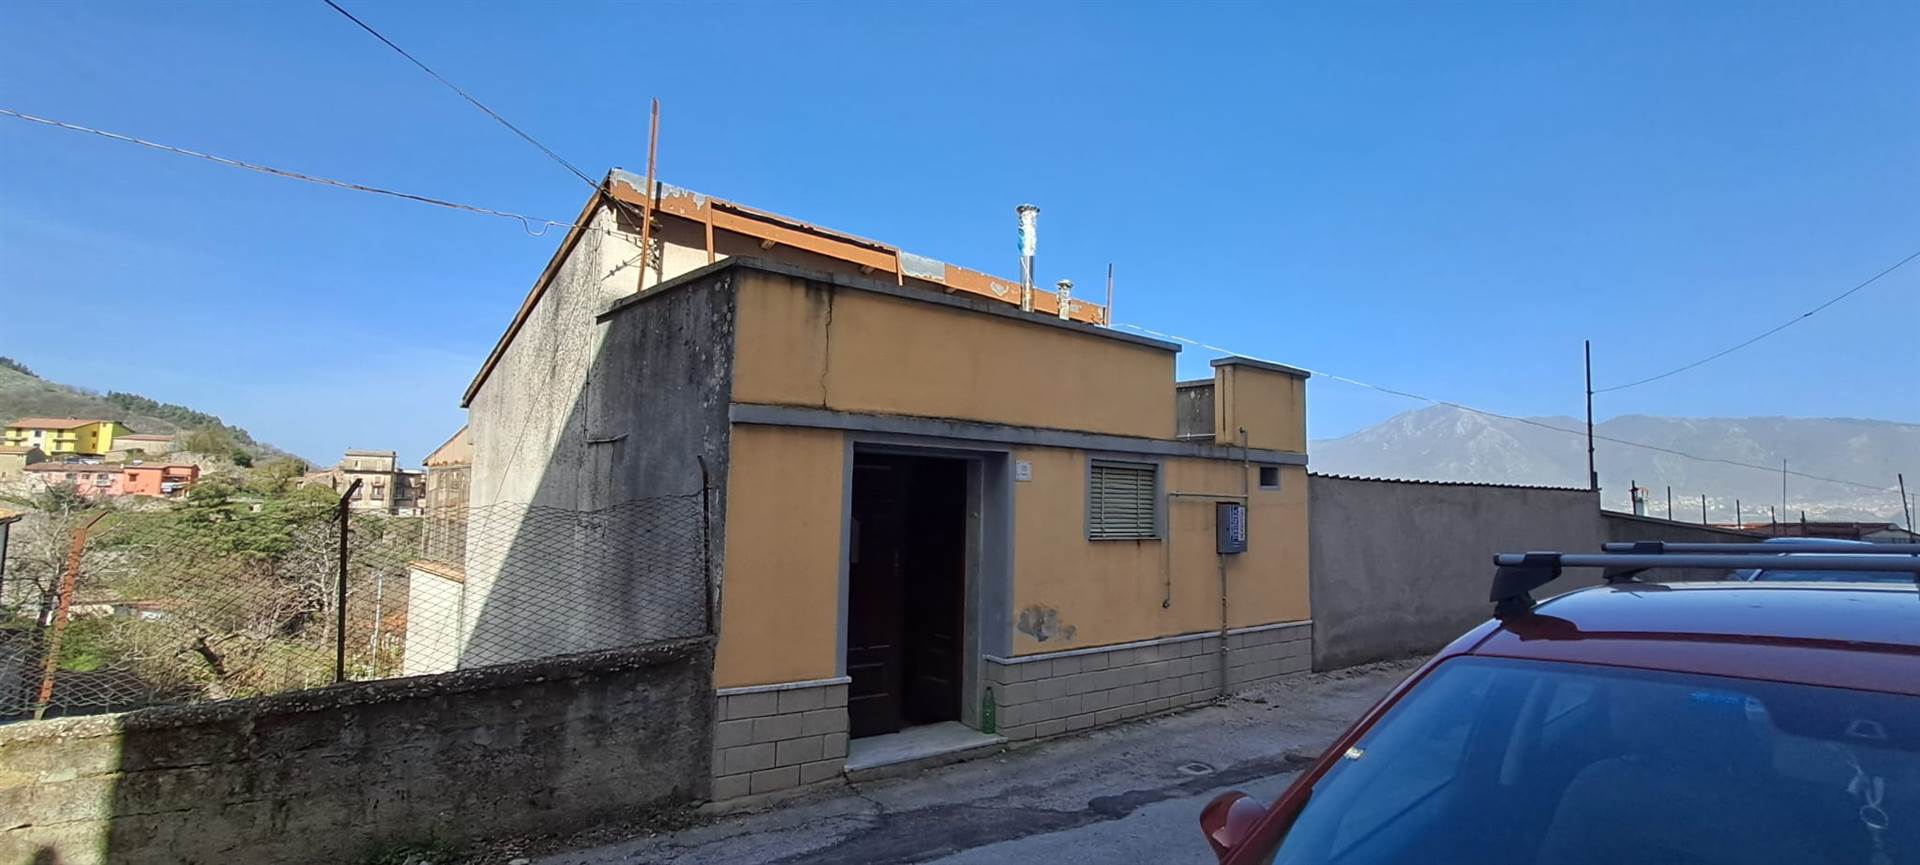 MONTELLA, Single house for sale of 104 Sq. mt., Good condition, Heating Individual heating system, Energetic class: F, placed at Ground on 2, 